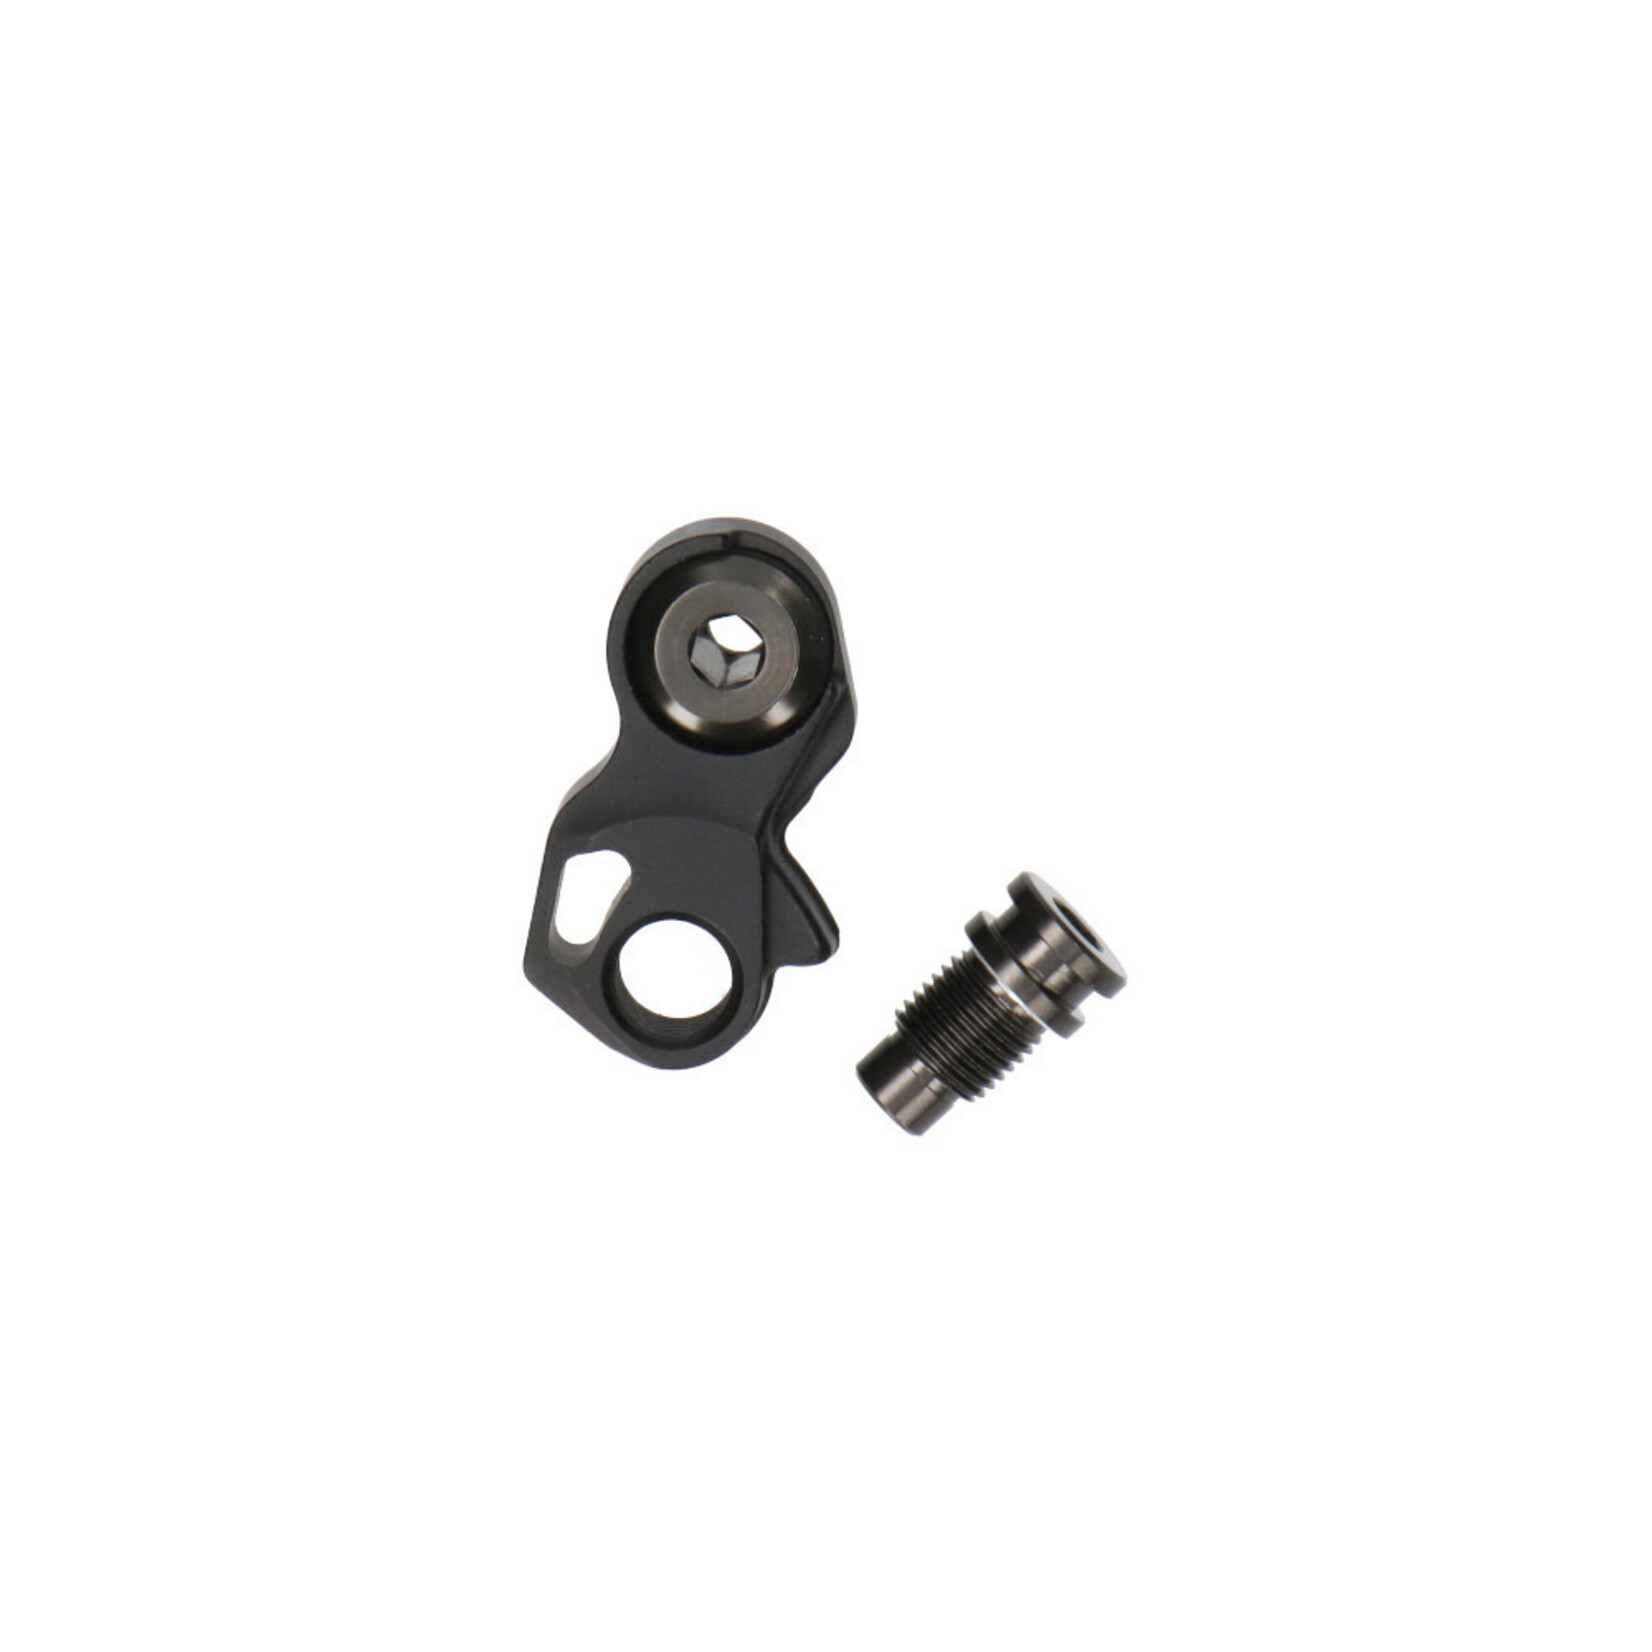 SHIMANO RD-R9250 BRACKET AXLE UNIT FOR NORMAL TYPE